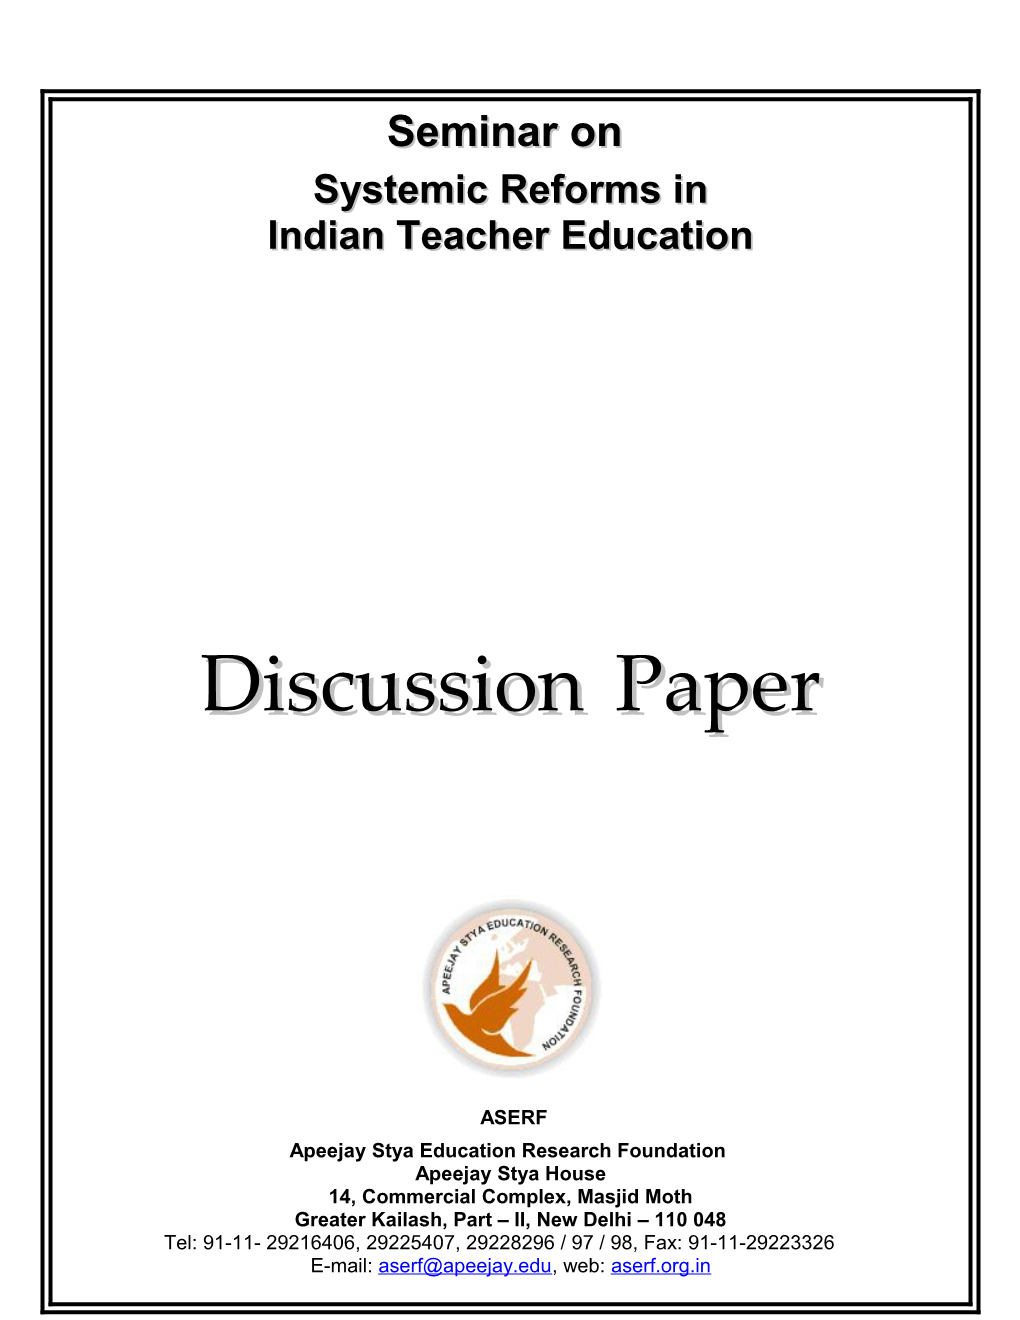 ASERF Seminar on Systemic Reforms